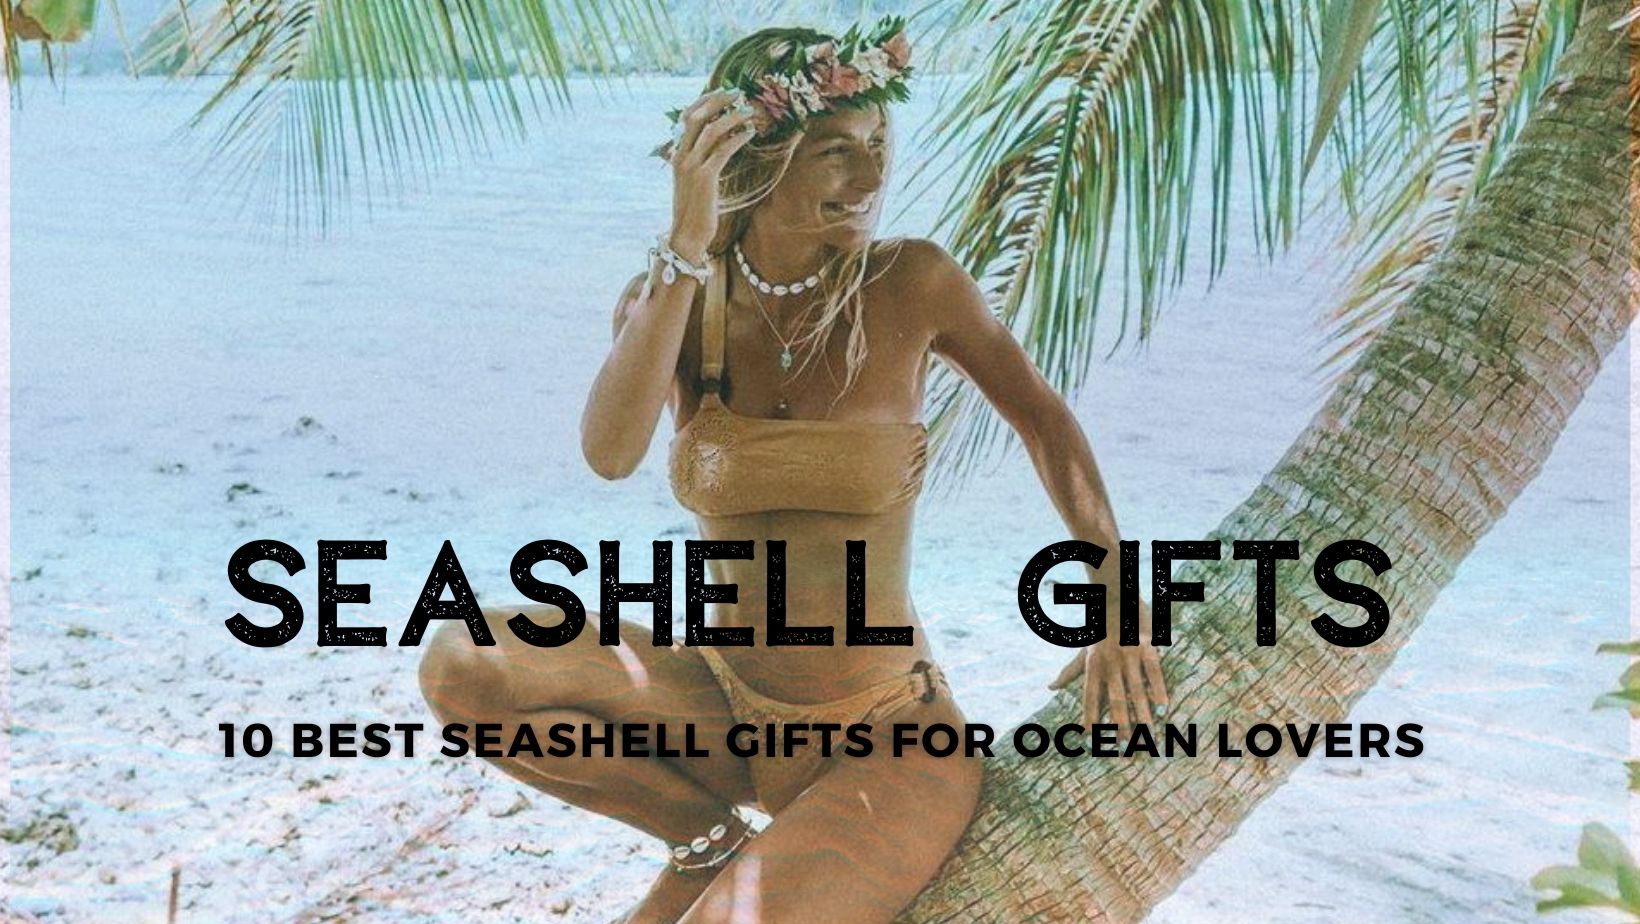 Seashell gifts for ocean lovers